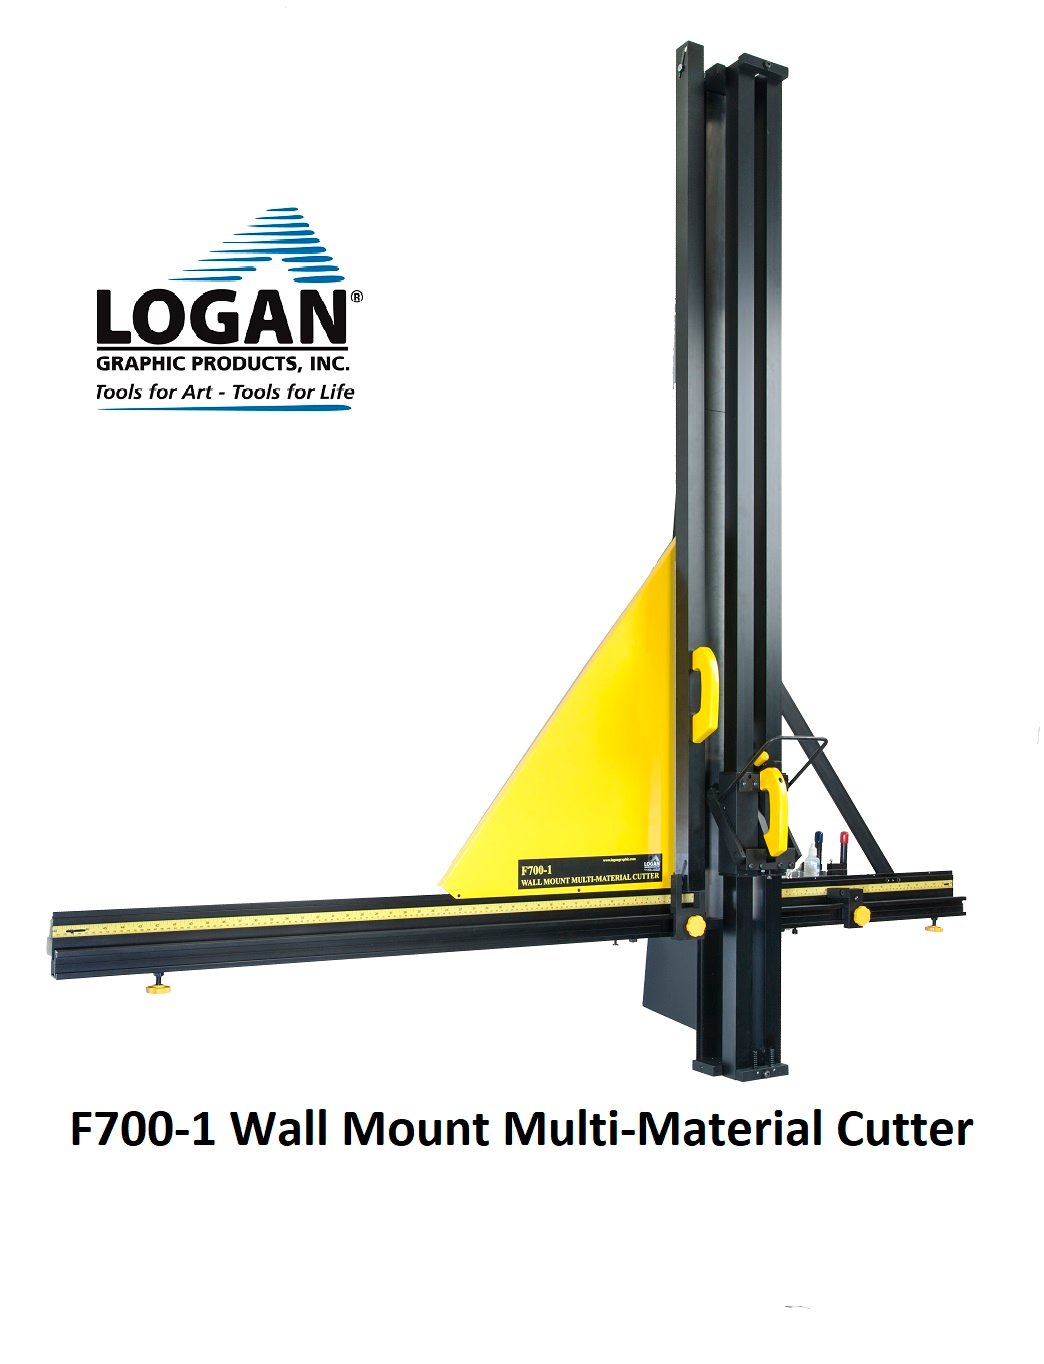 F700-1 Wall Mount Multi-Material Cutter